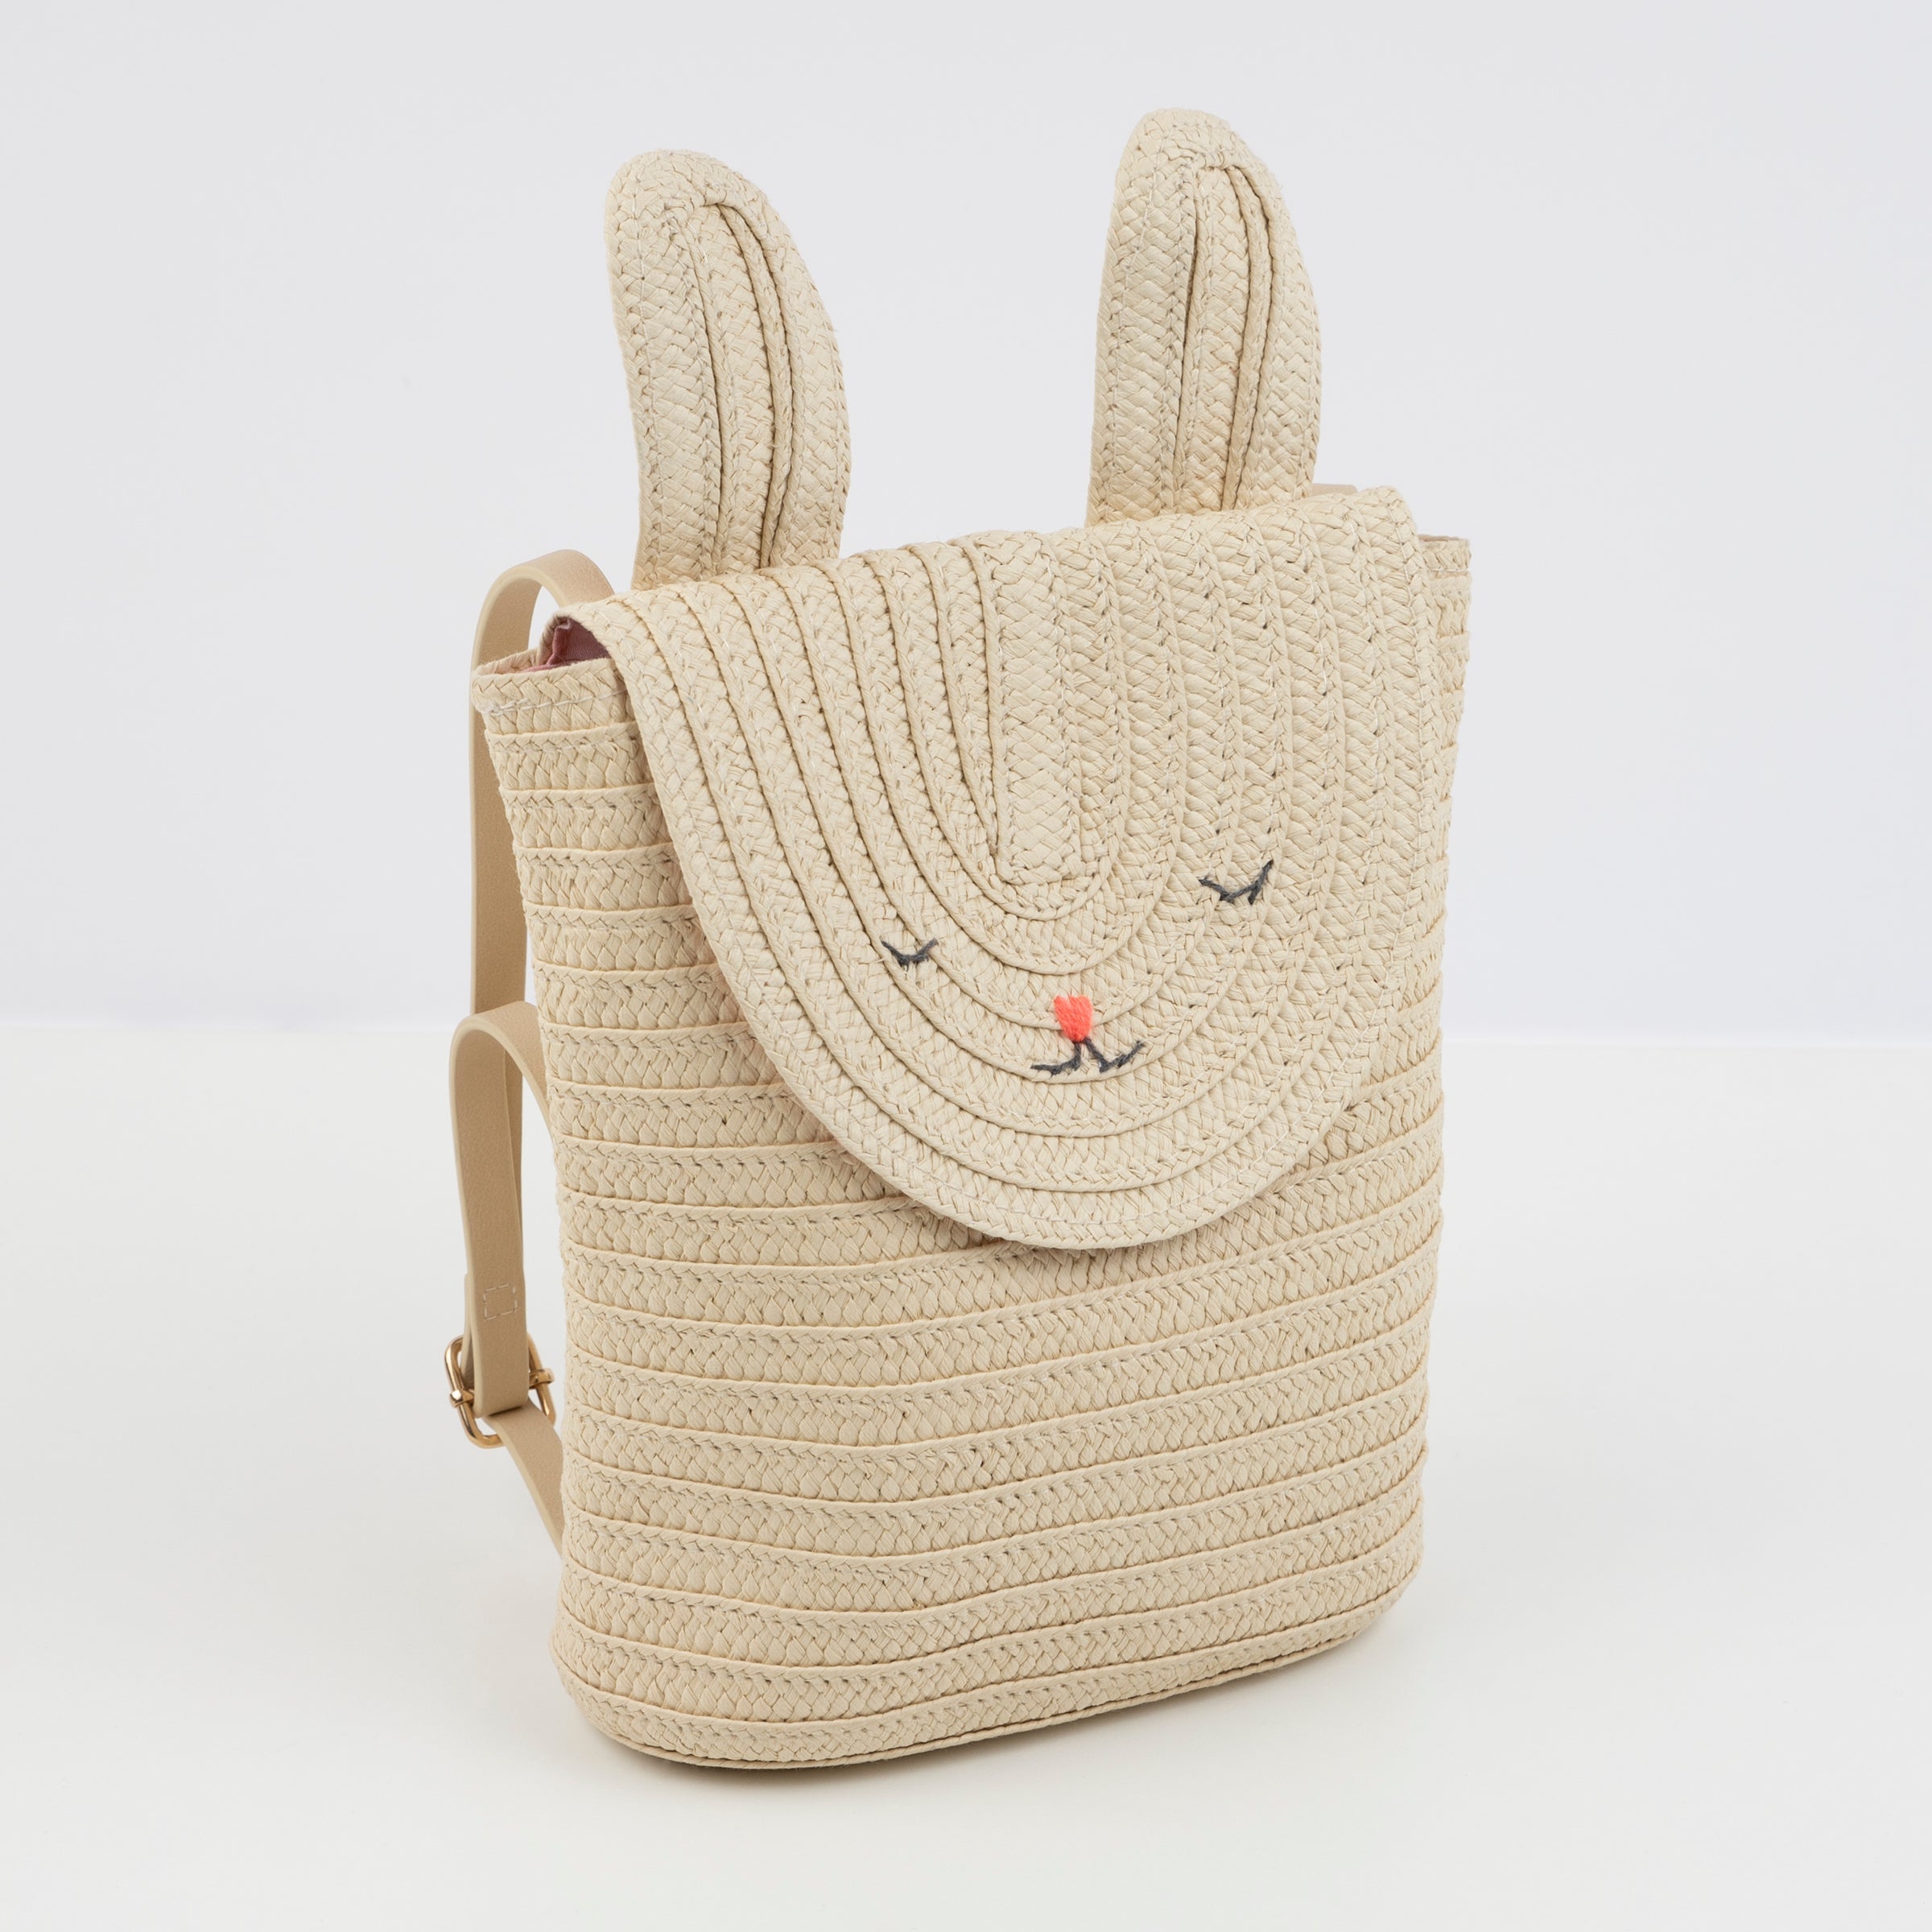 Our kids backpack in the shape of a bunny is is the perfect Easter gift for kids and a fun kids accessory.